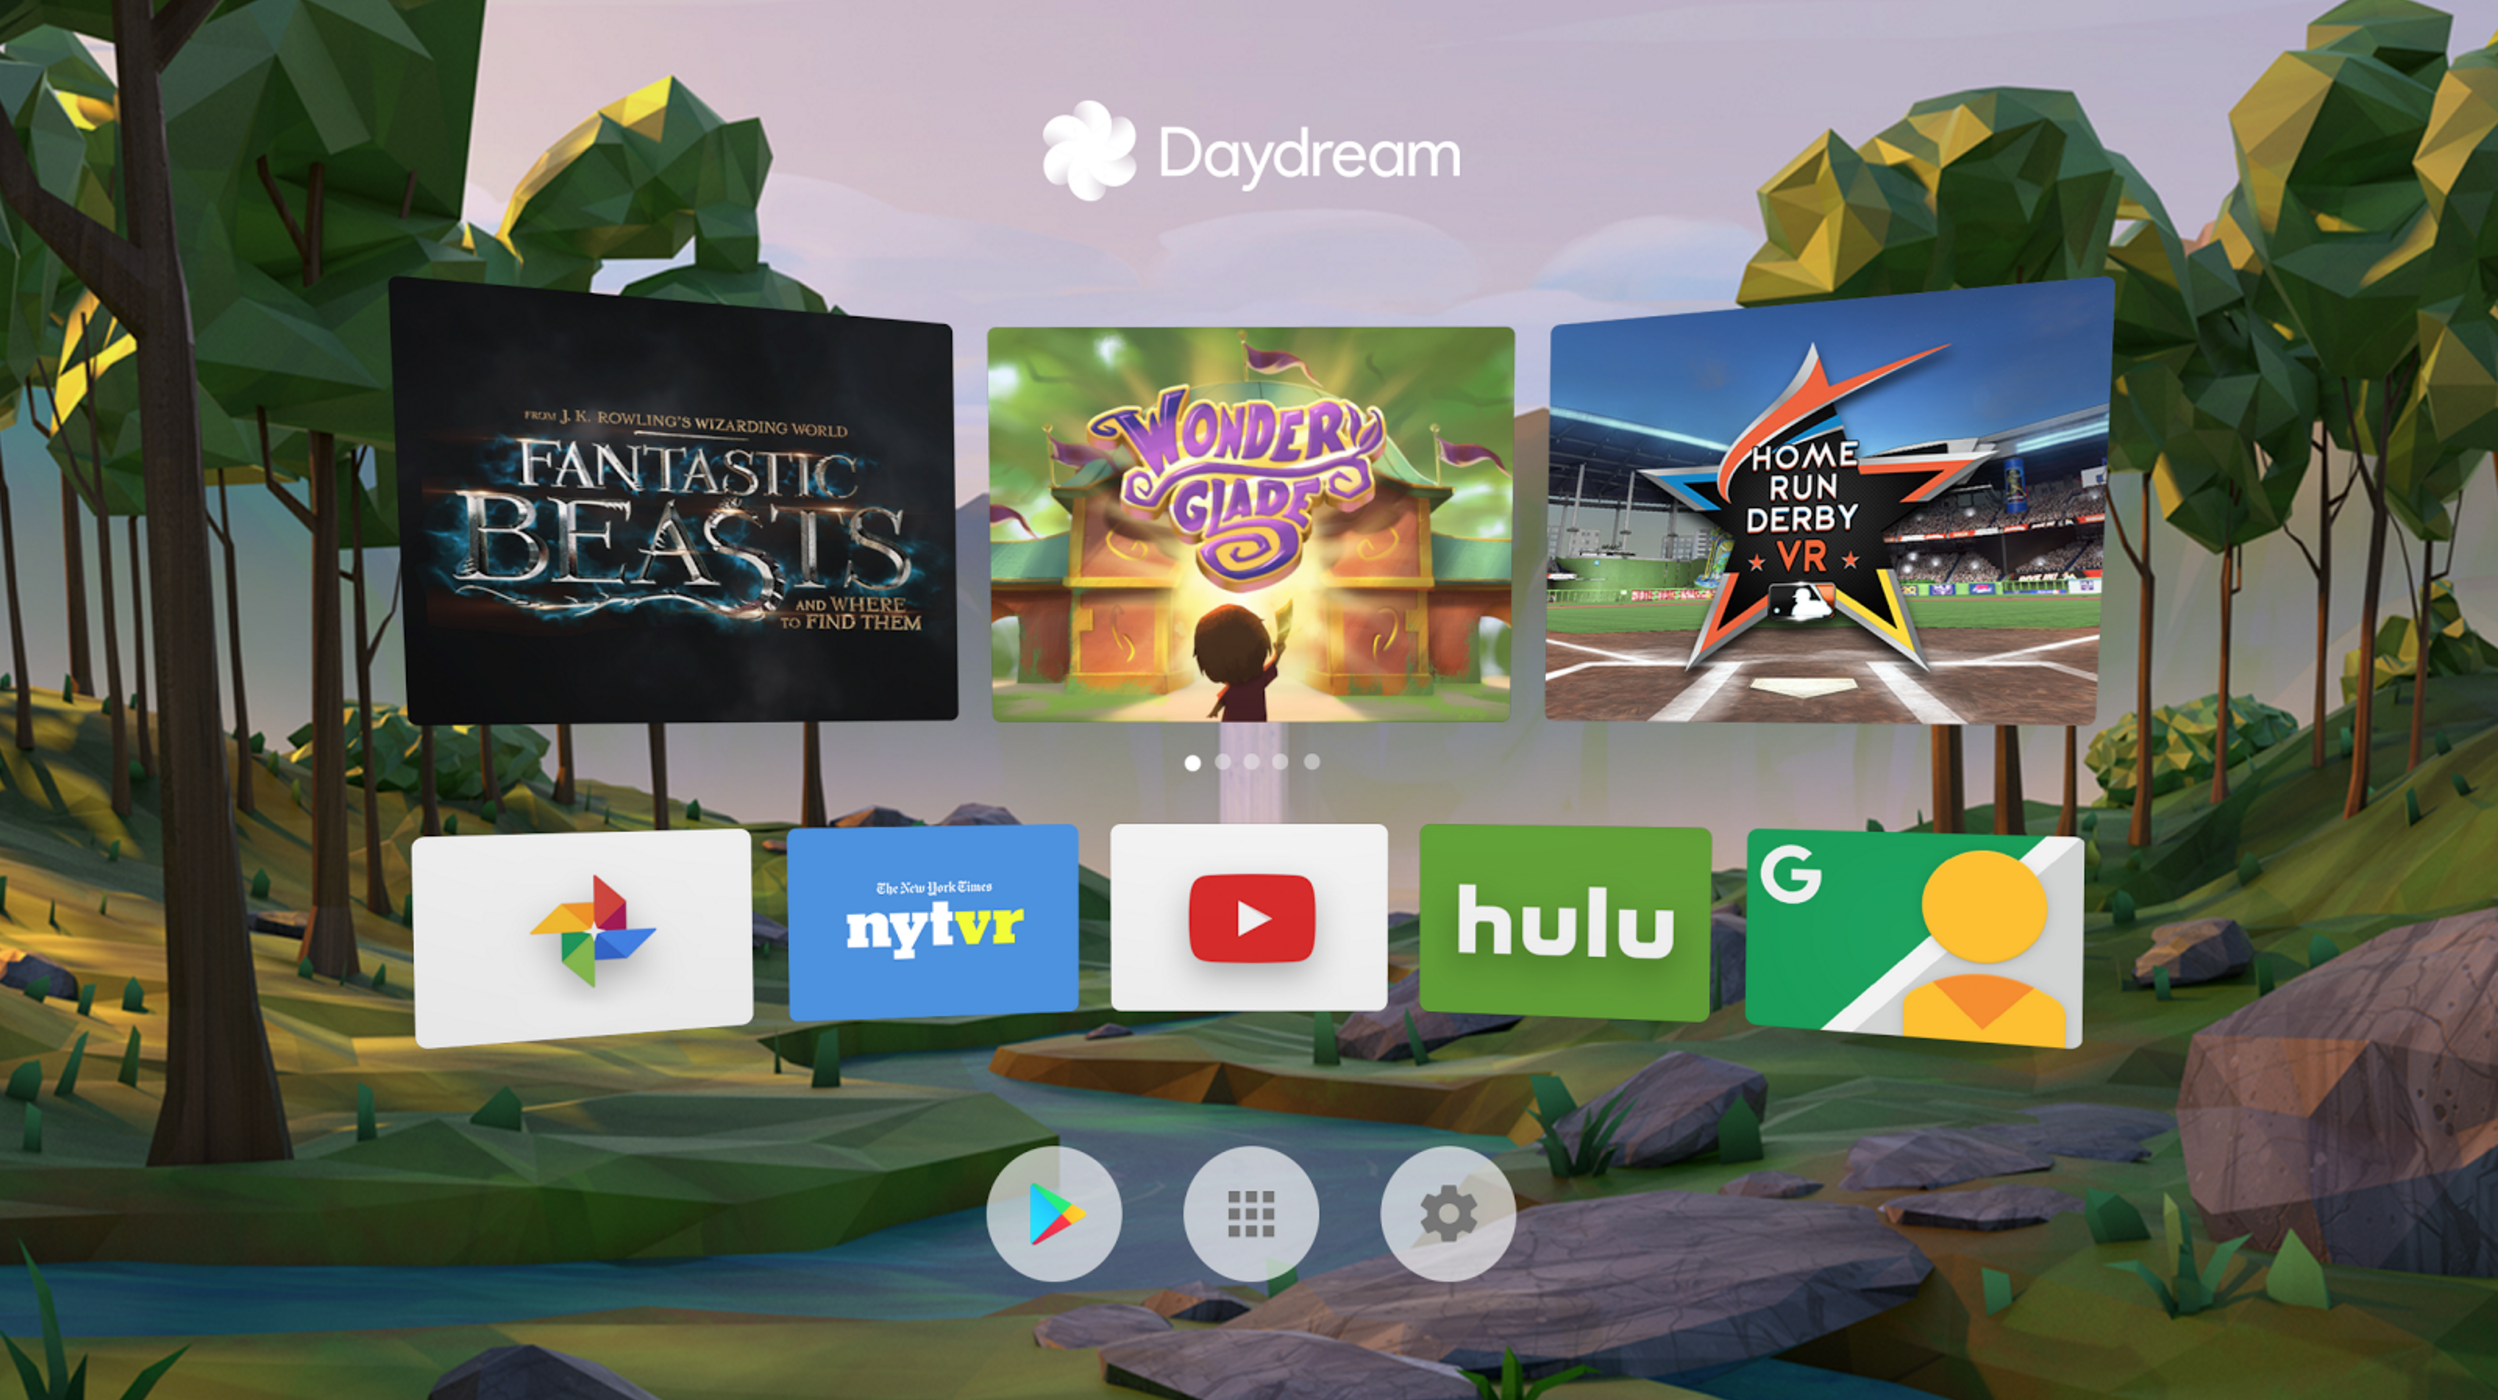 the apps you need to use google's daydream view headset are now on the play store - 9to5google